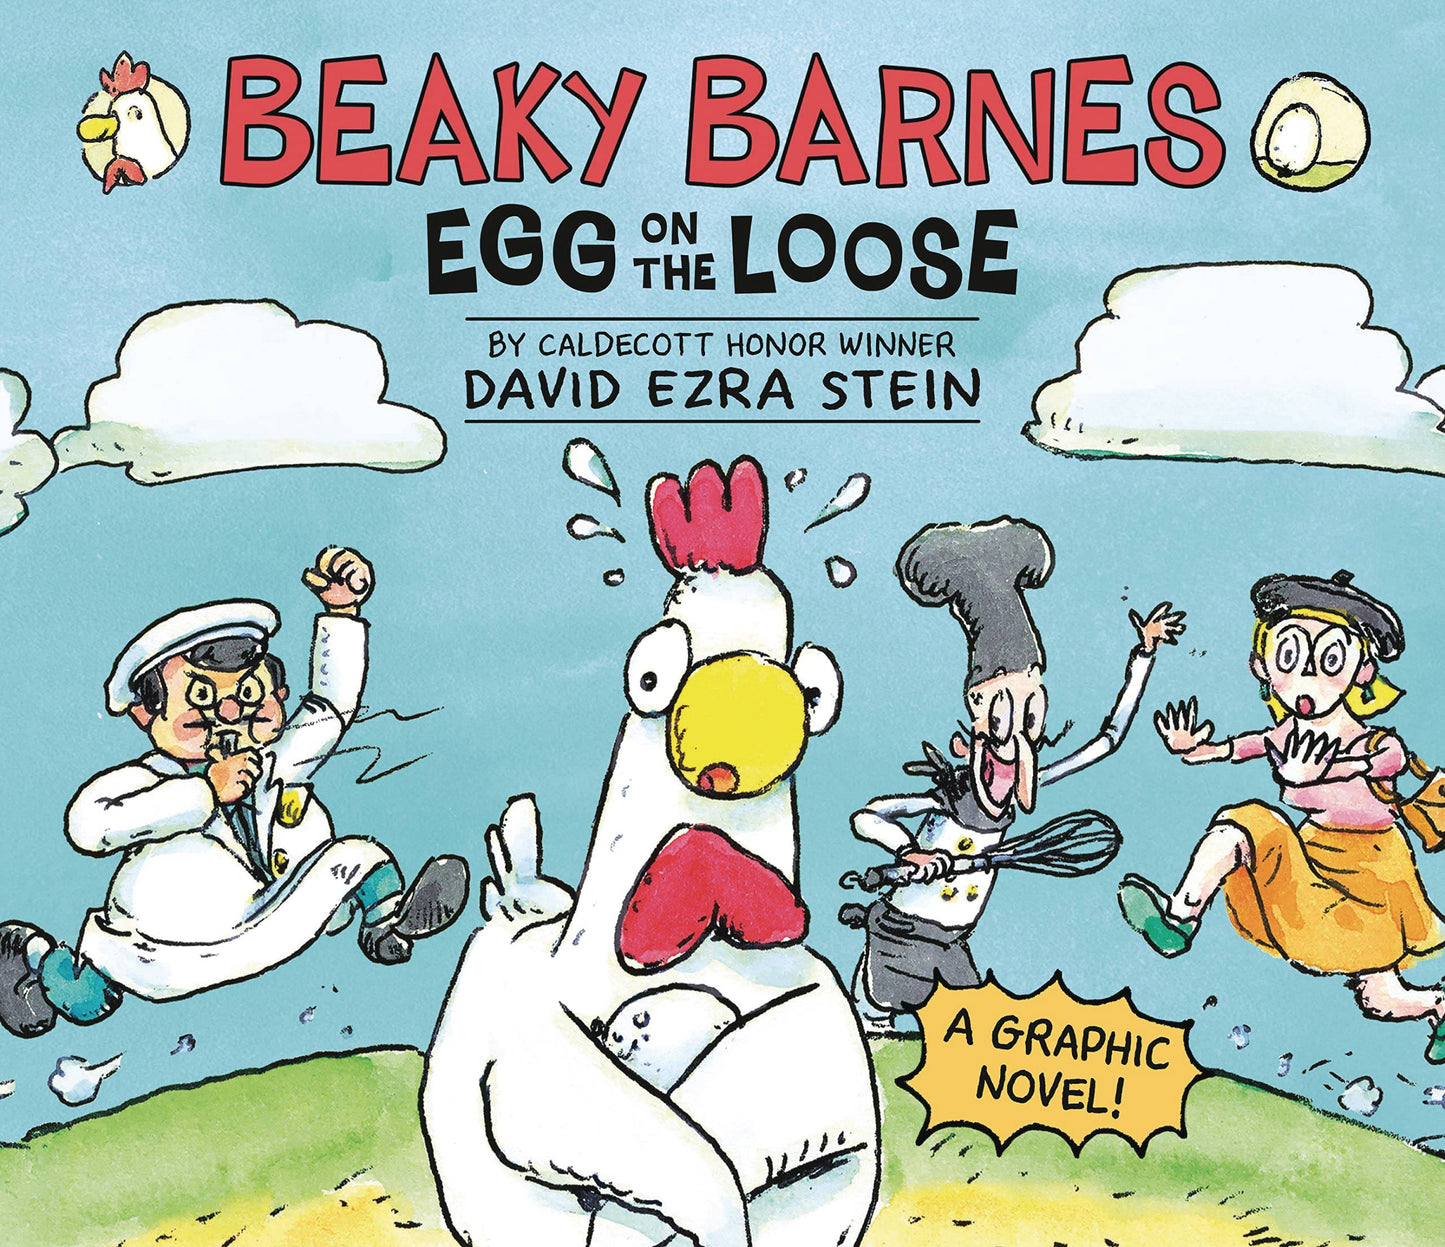 The One Stop Shop Comics & Games Beaky Barnes Gn Egg On The Loose (C: 0-1-2) (01/04/2023) PENGUIN WORKSHOP